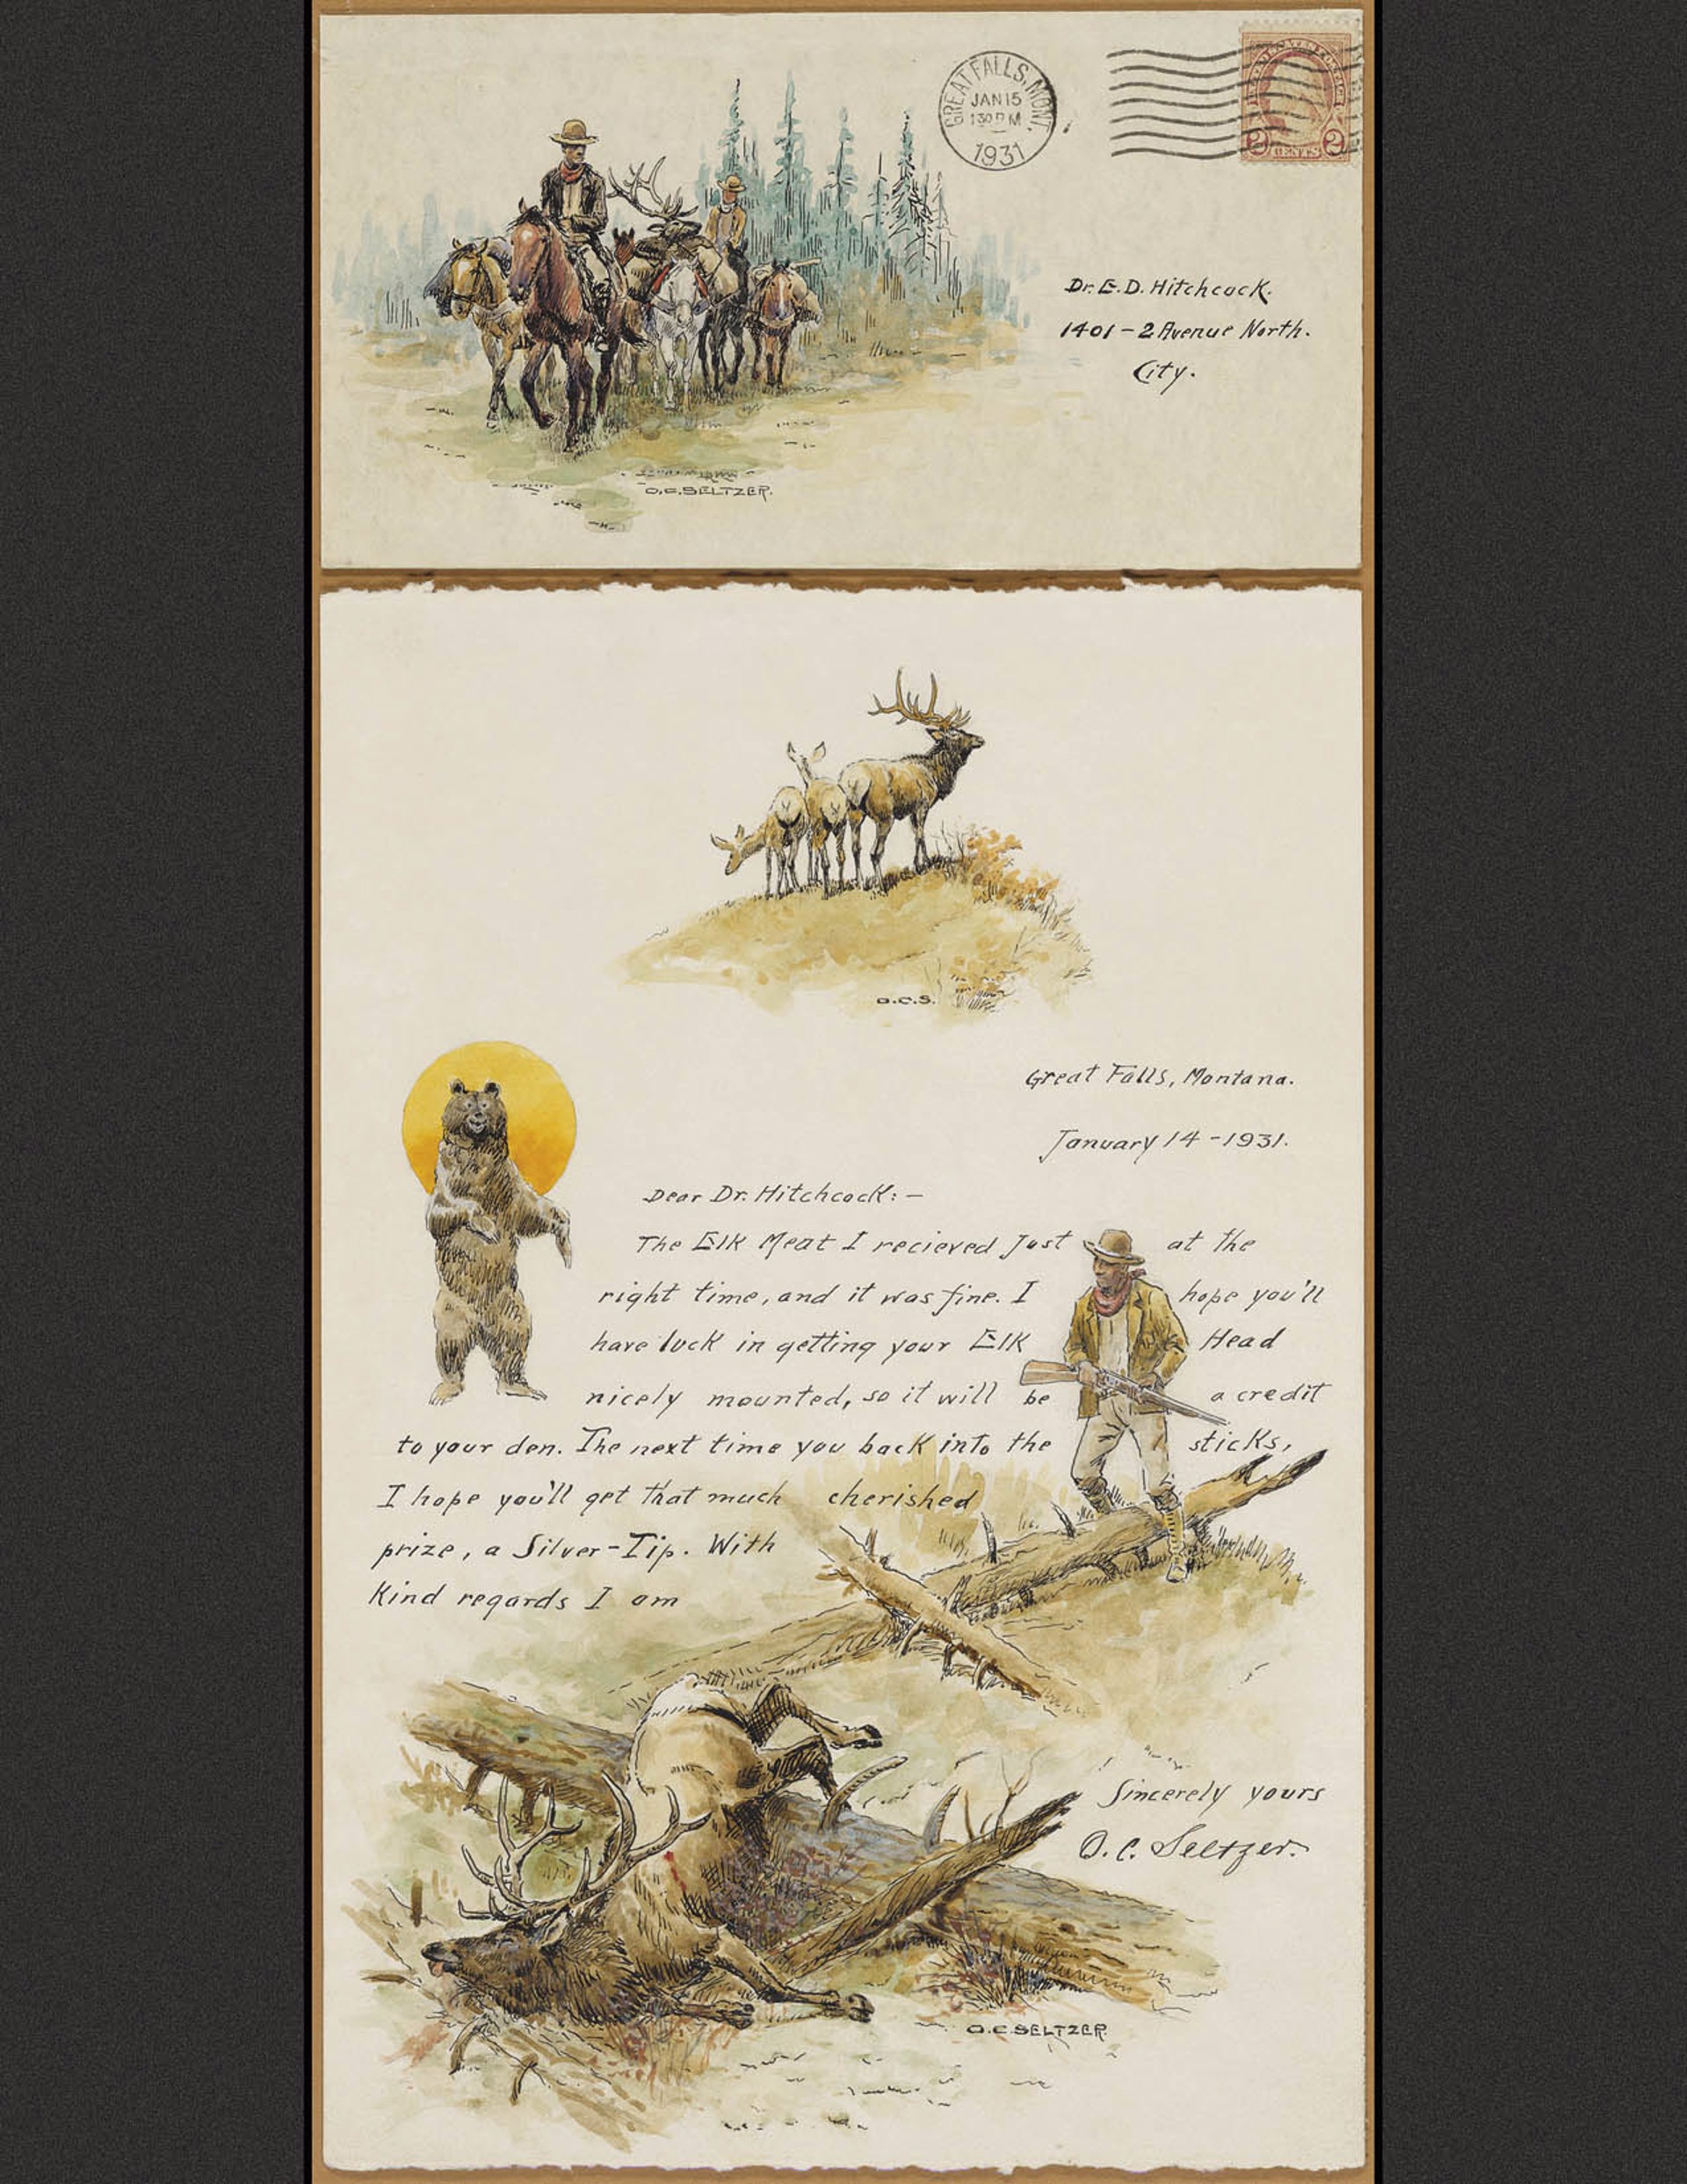 Illustrated Letter by Olaf Carl Seltzer